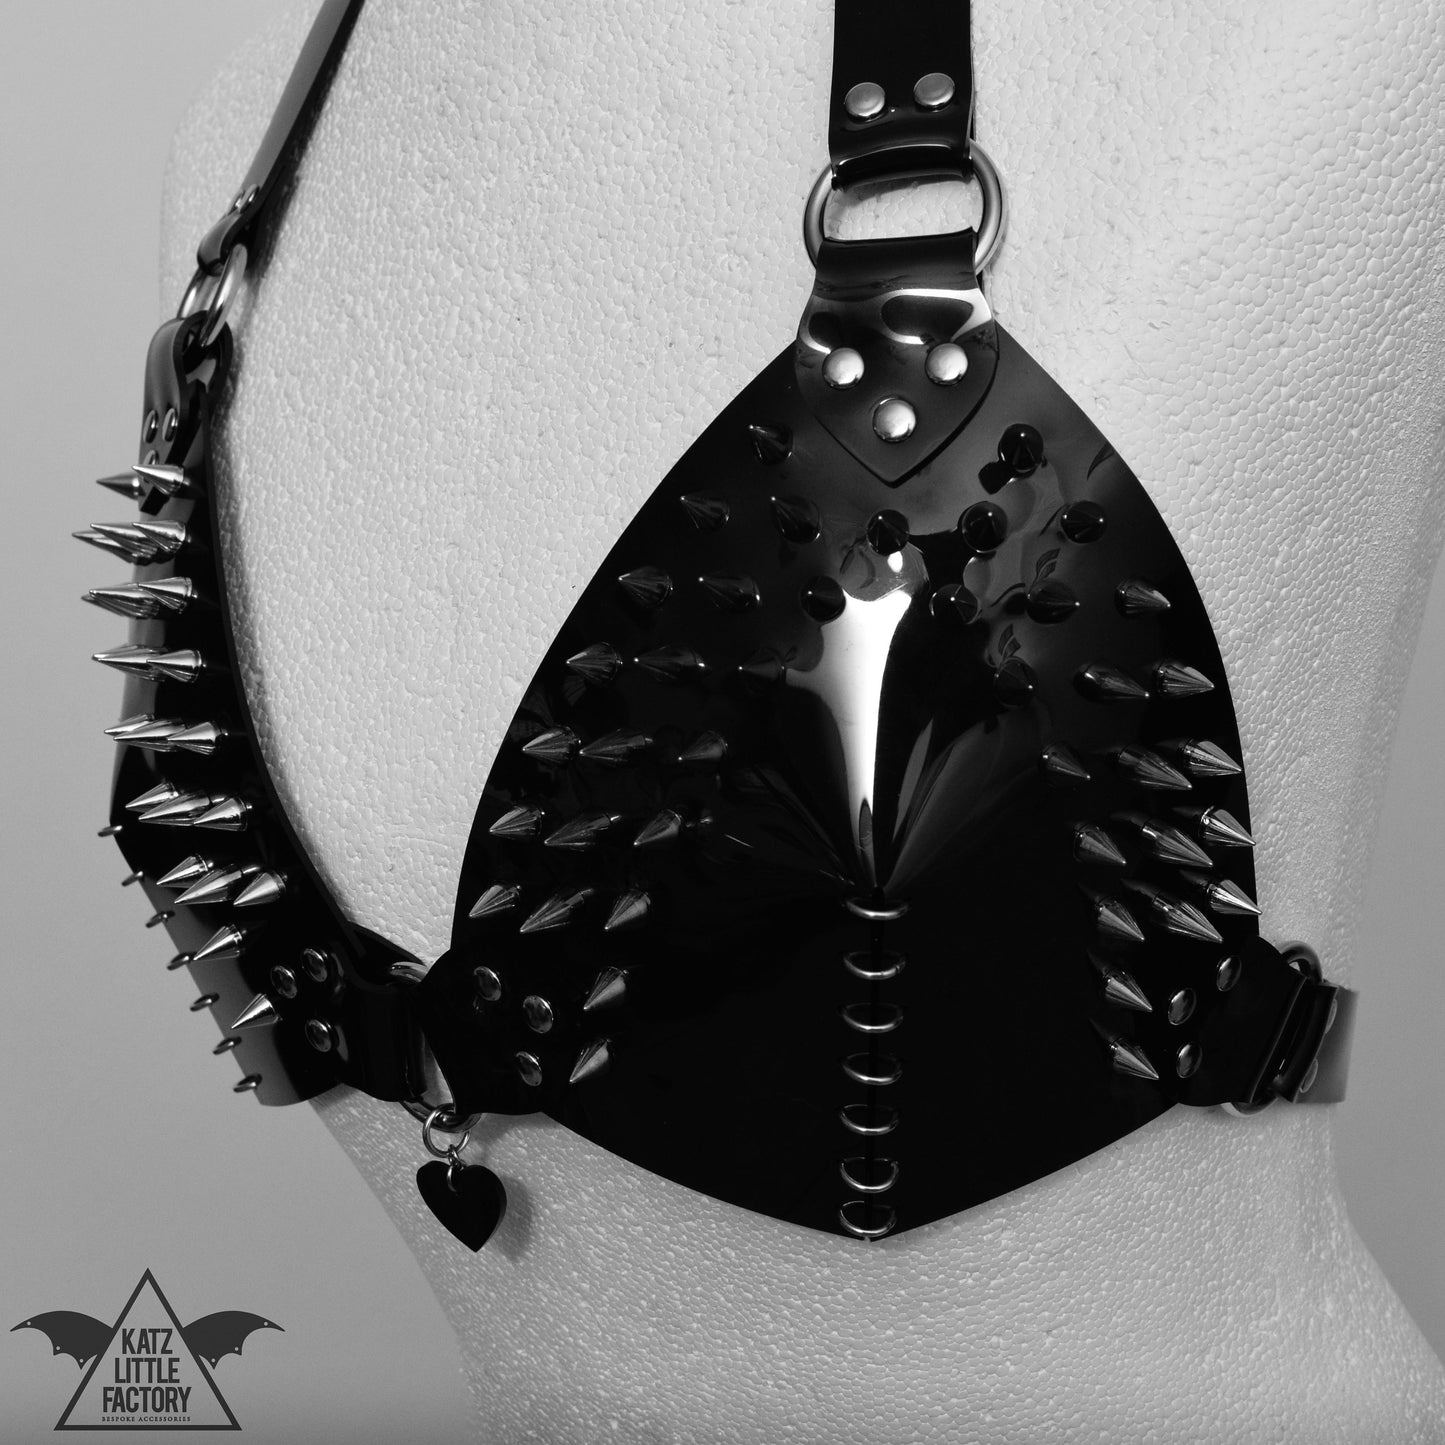 This photo features a fashion accessory bra. The piece is made of glossy black PVC with spikes protruding from it, featuring a heart shaped pendant.